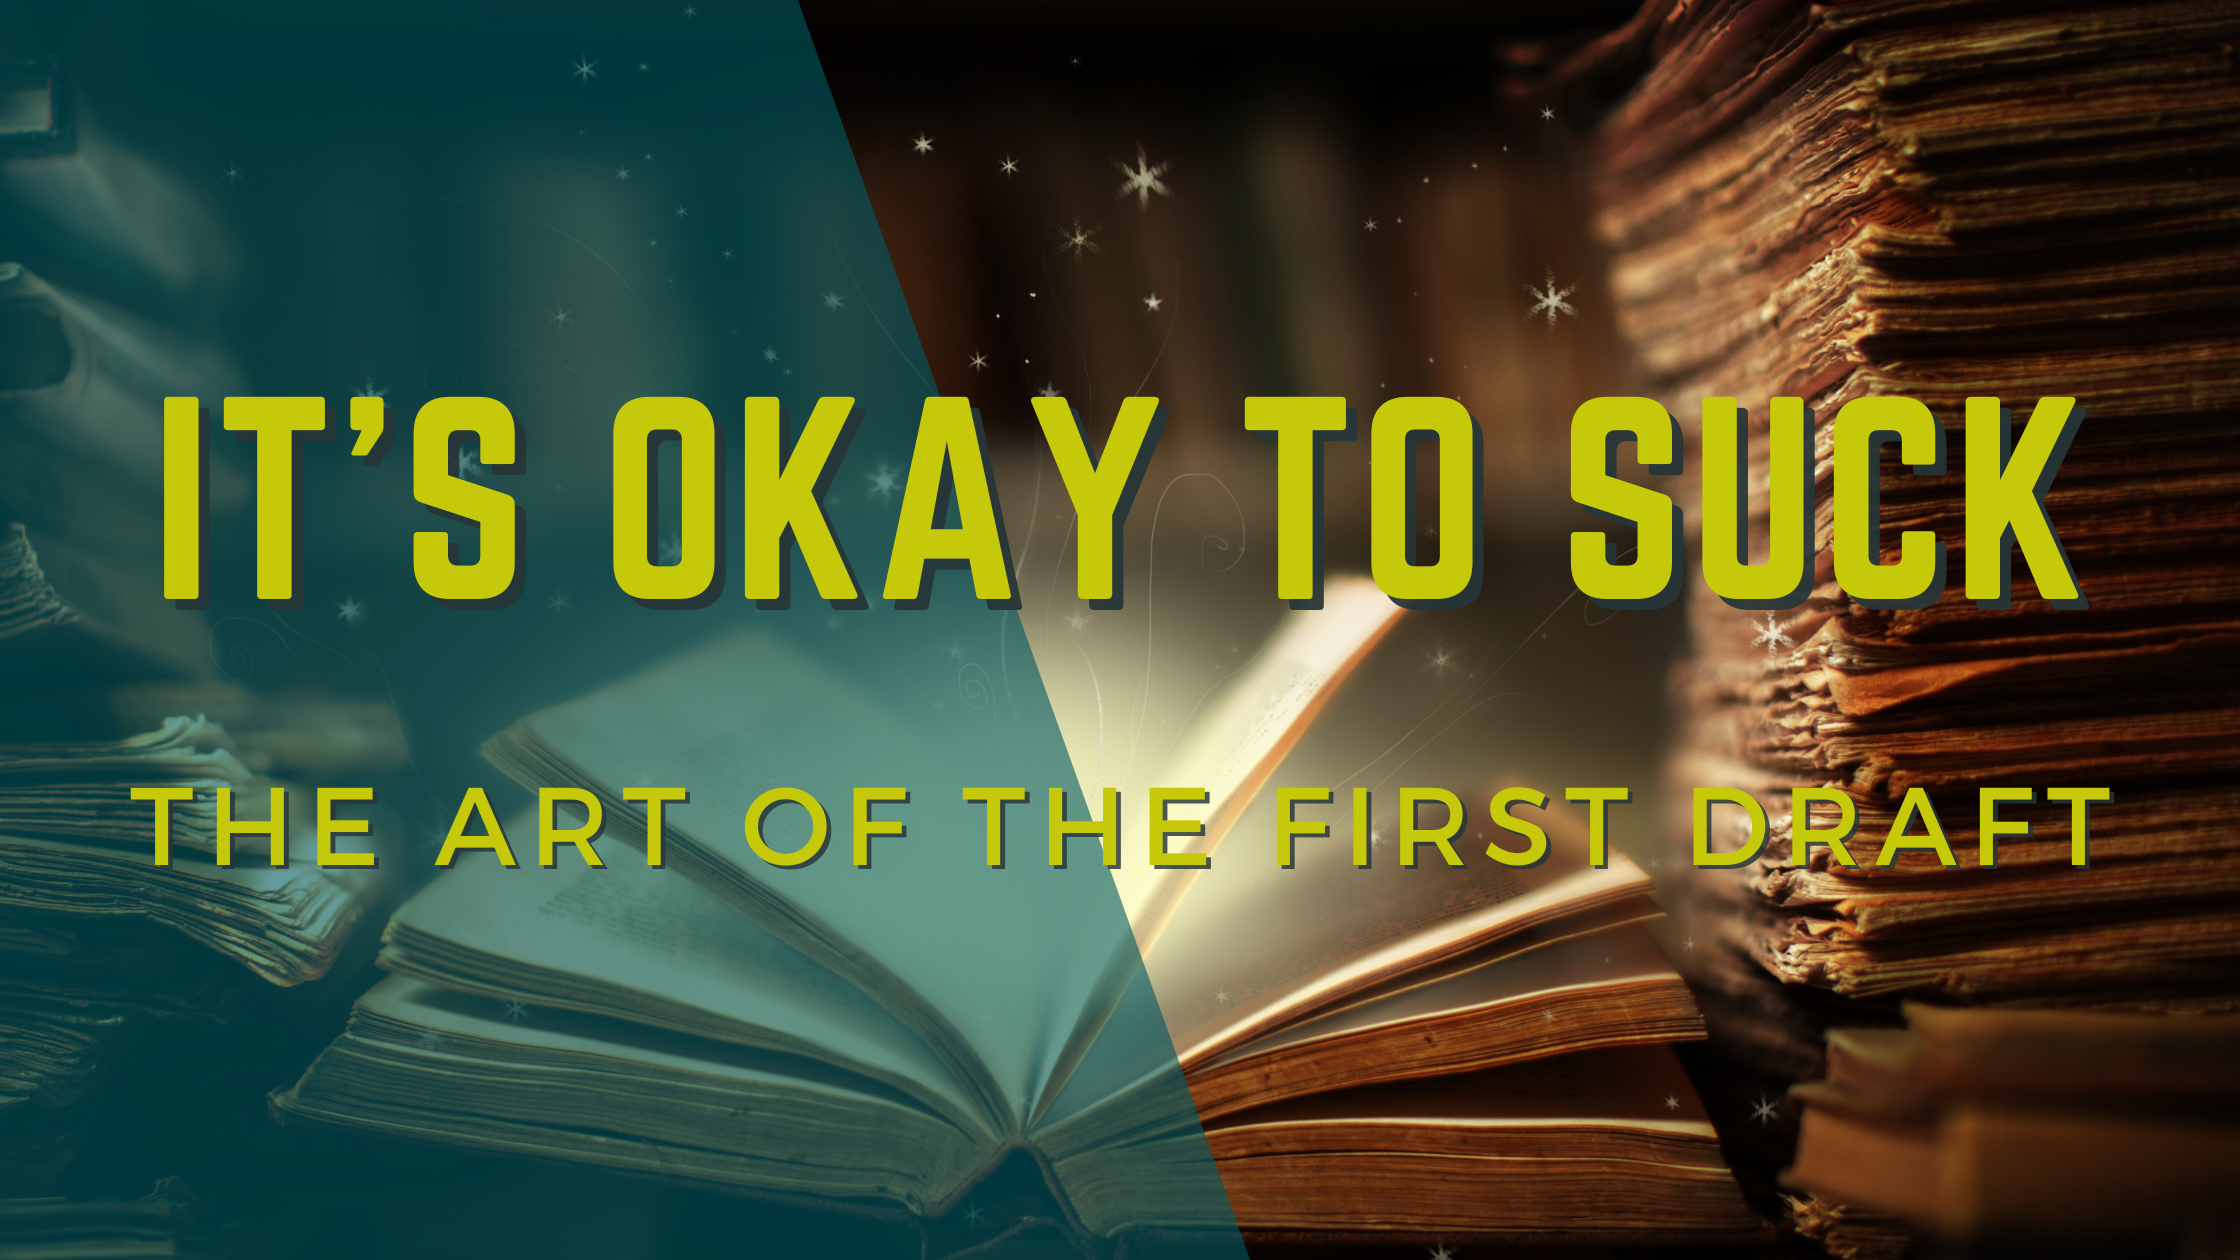 It’s Okay to Suck: The Art of the First Draft